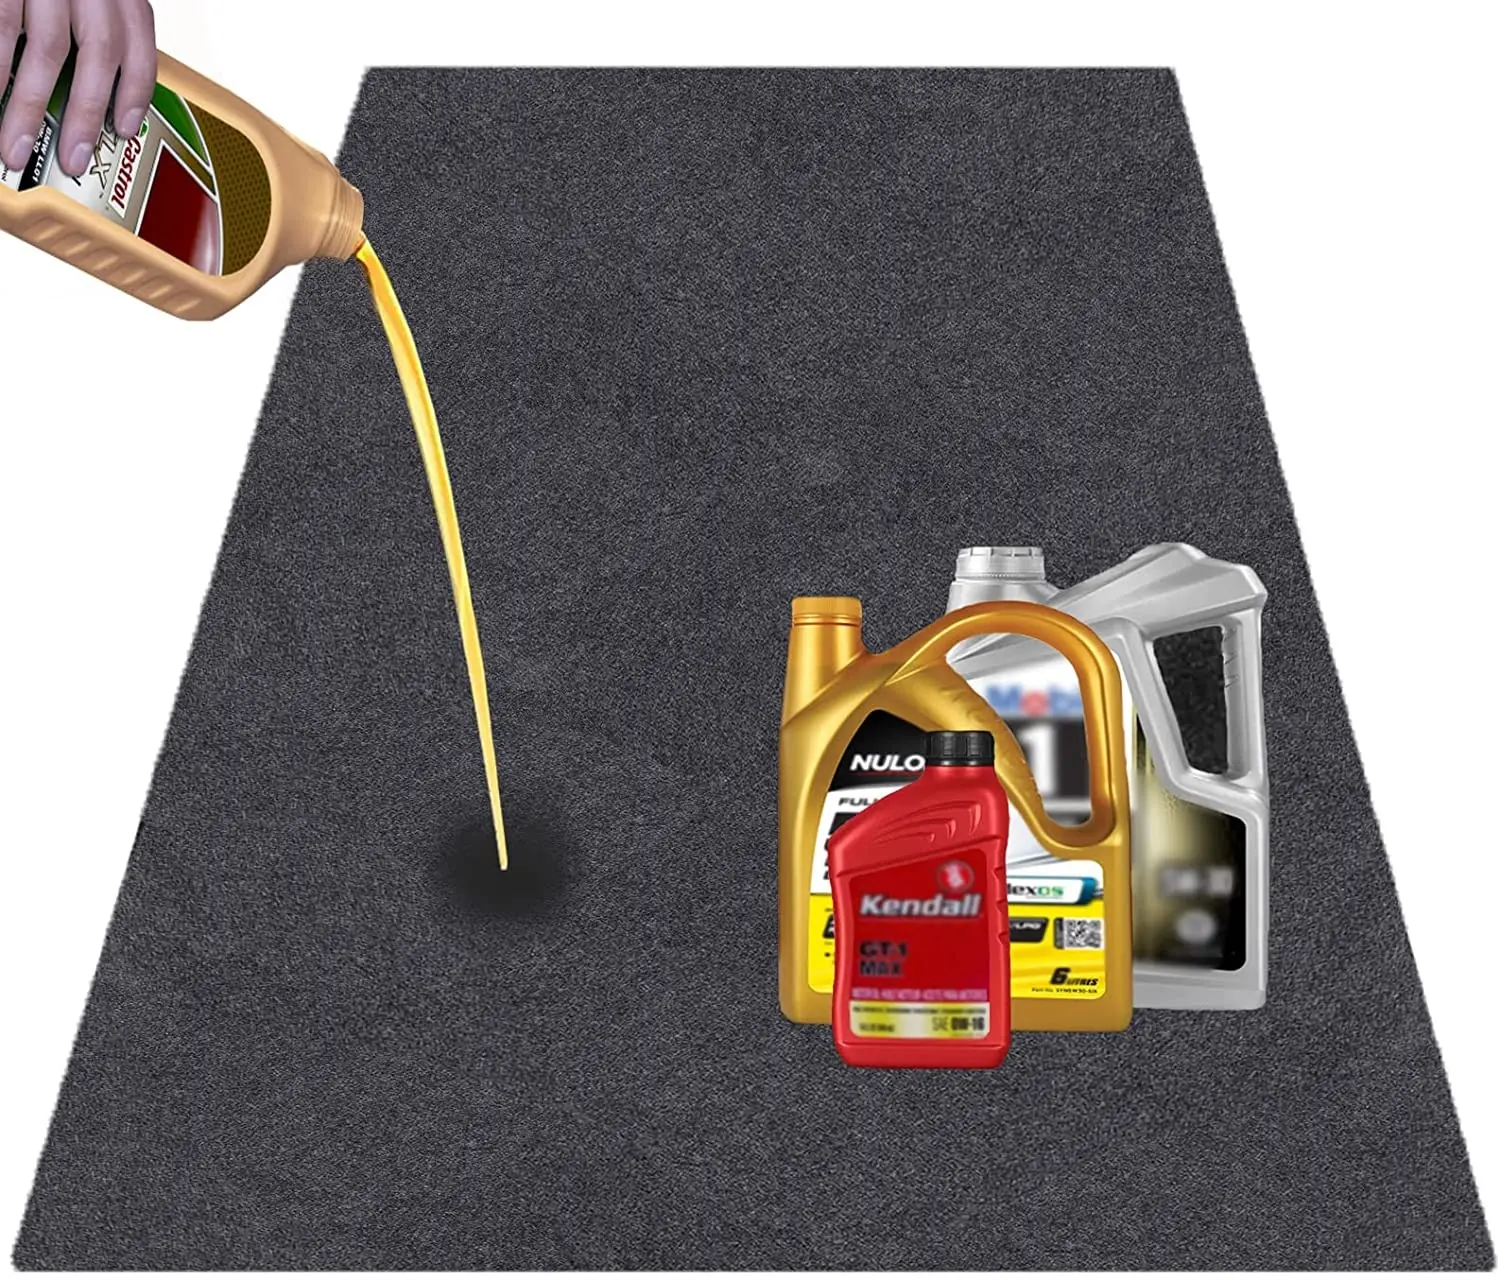 Garage mats protect floors from spills drips stains washable reusable floor mats